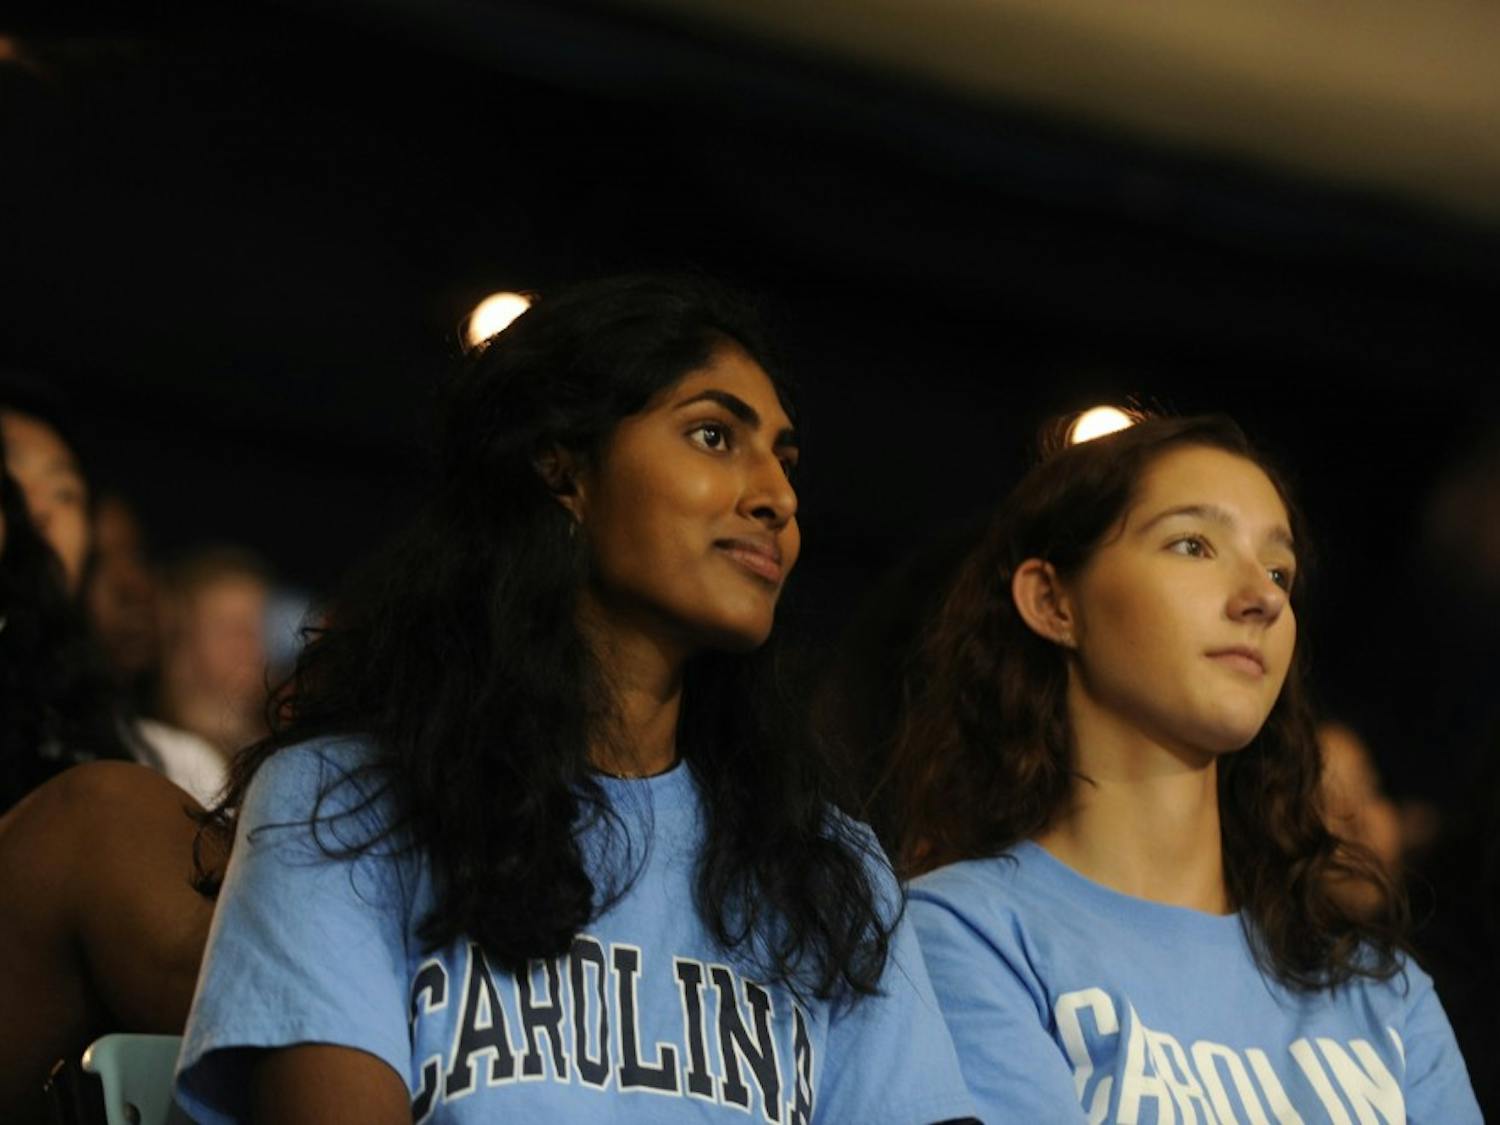 Students attended the 2019 Convocation on Sunday, Aug. 19. Convocation is regarded as the beginning of every incoming-student's journey at Carolina, as speakers including the Chancellor, deans from various departments and student leaders welcome students to the university. 